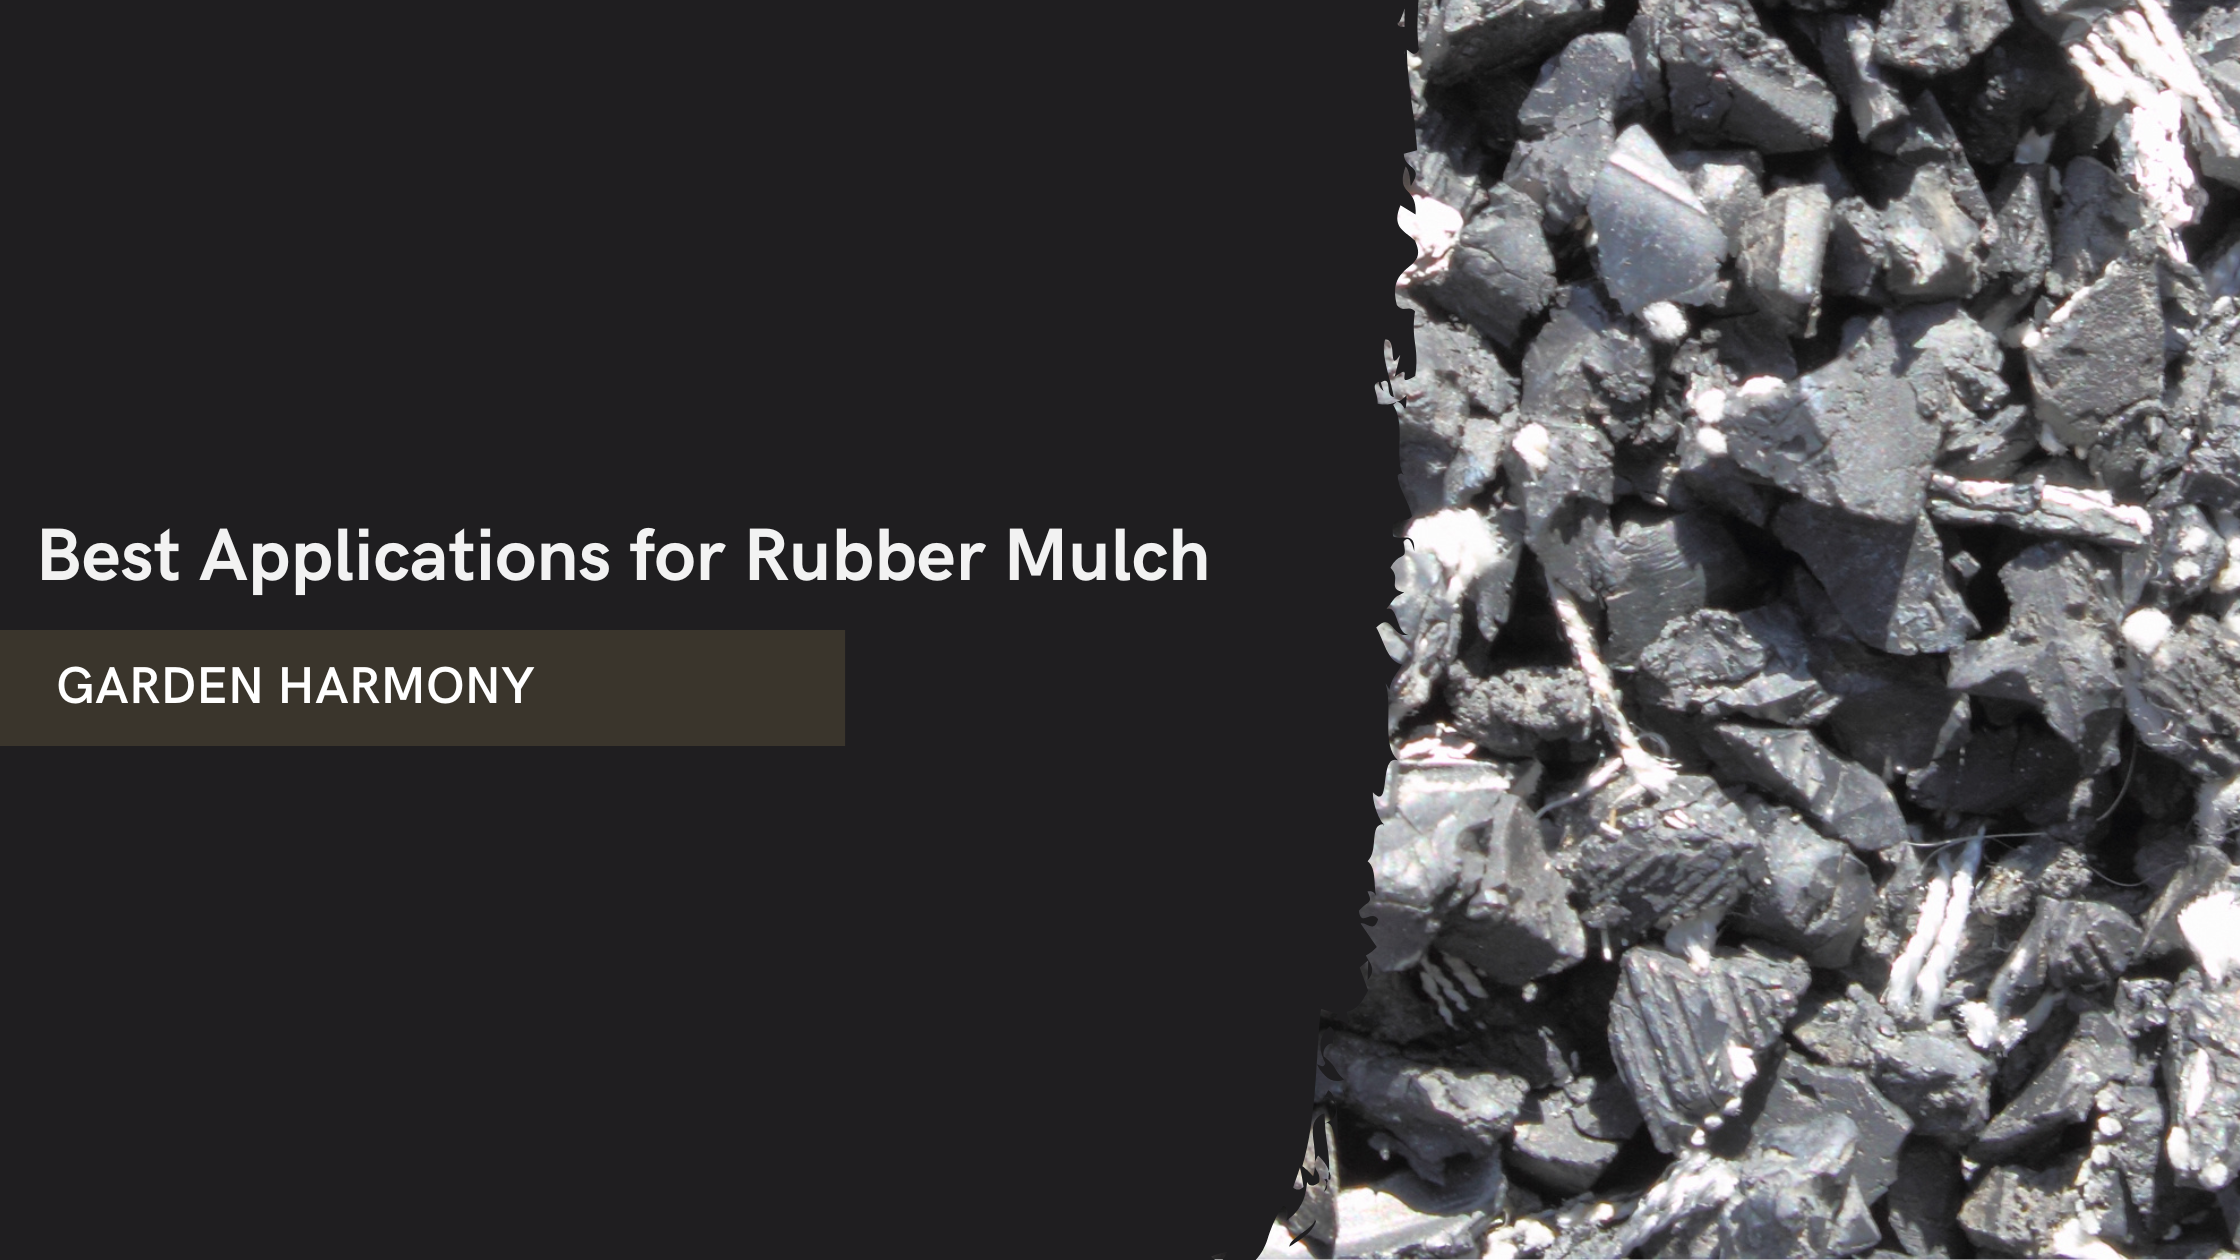 Best Applications for Rubber Mulch